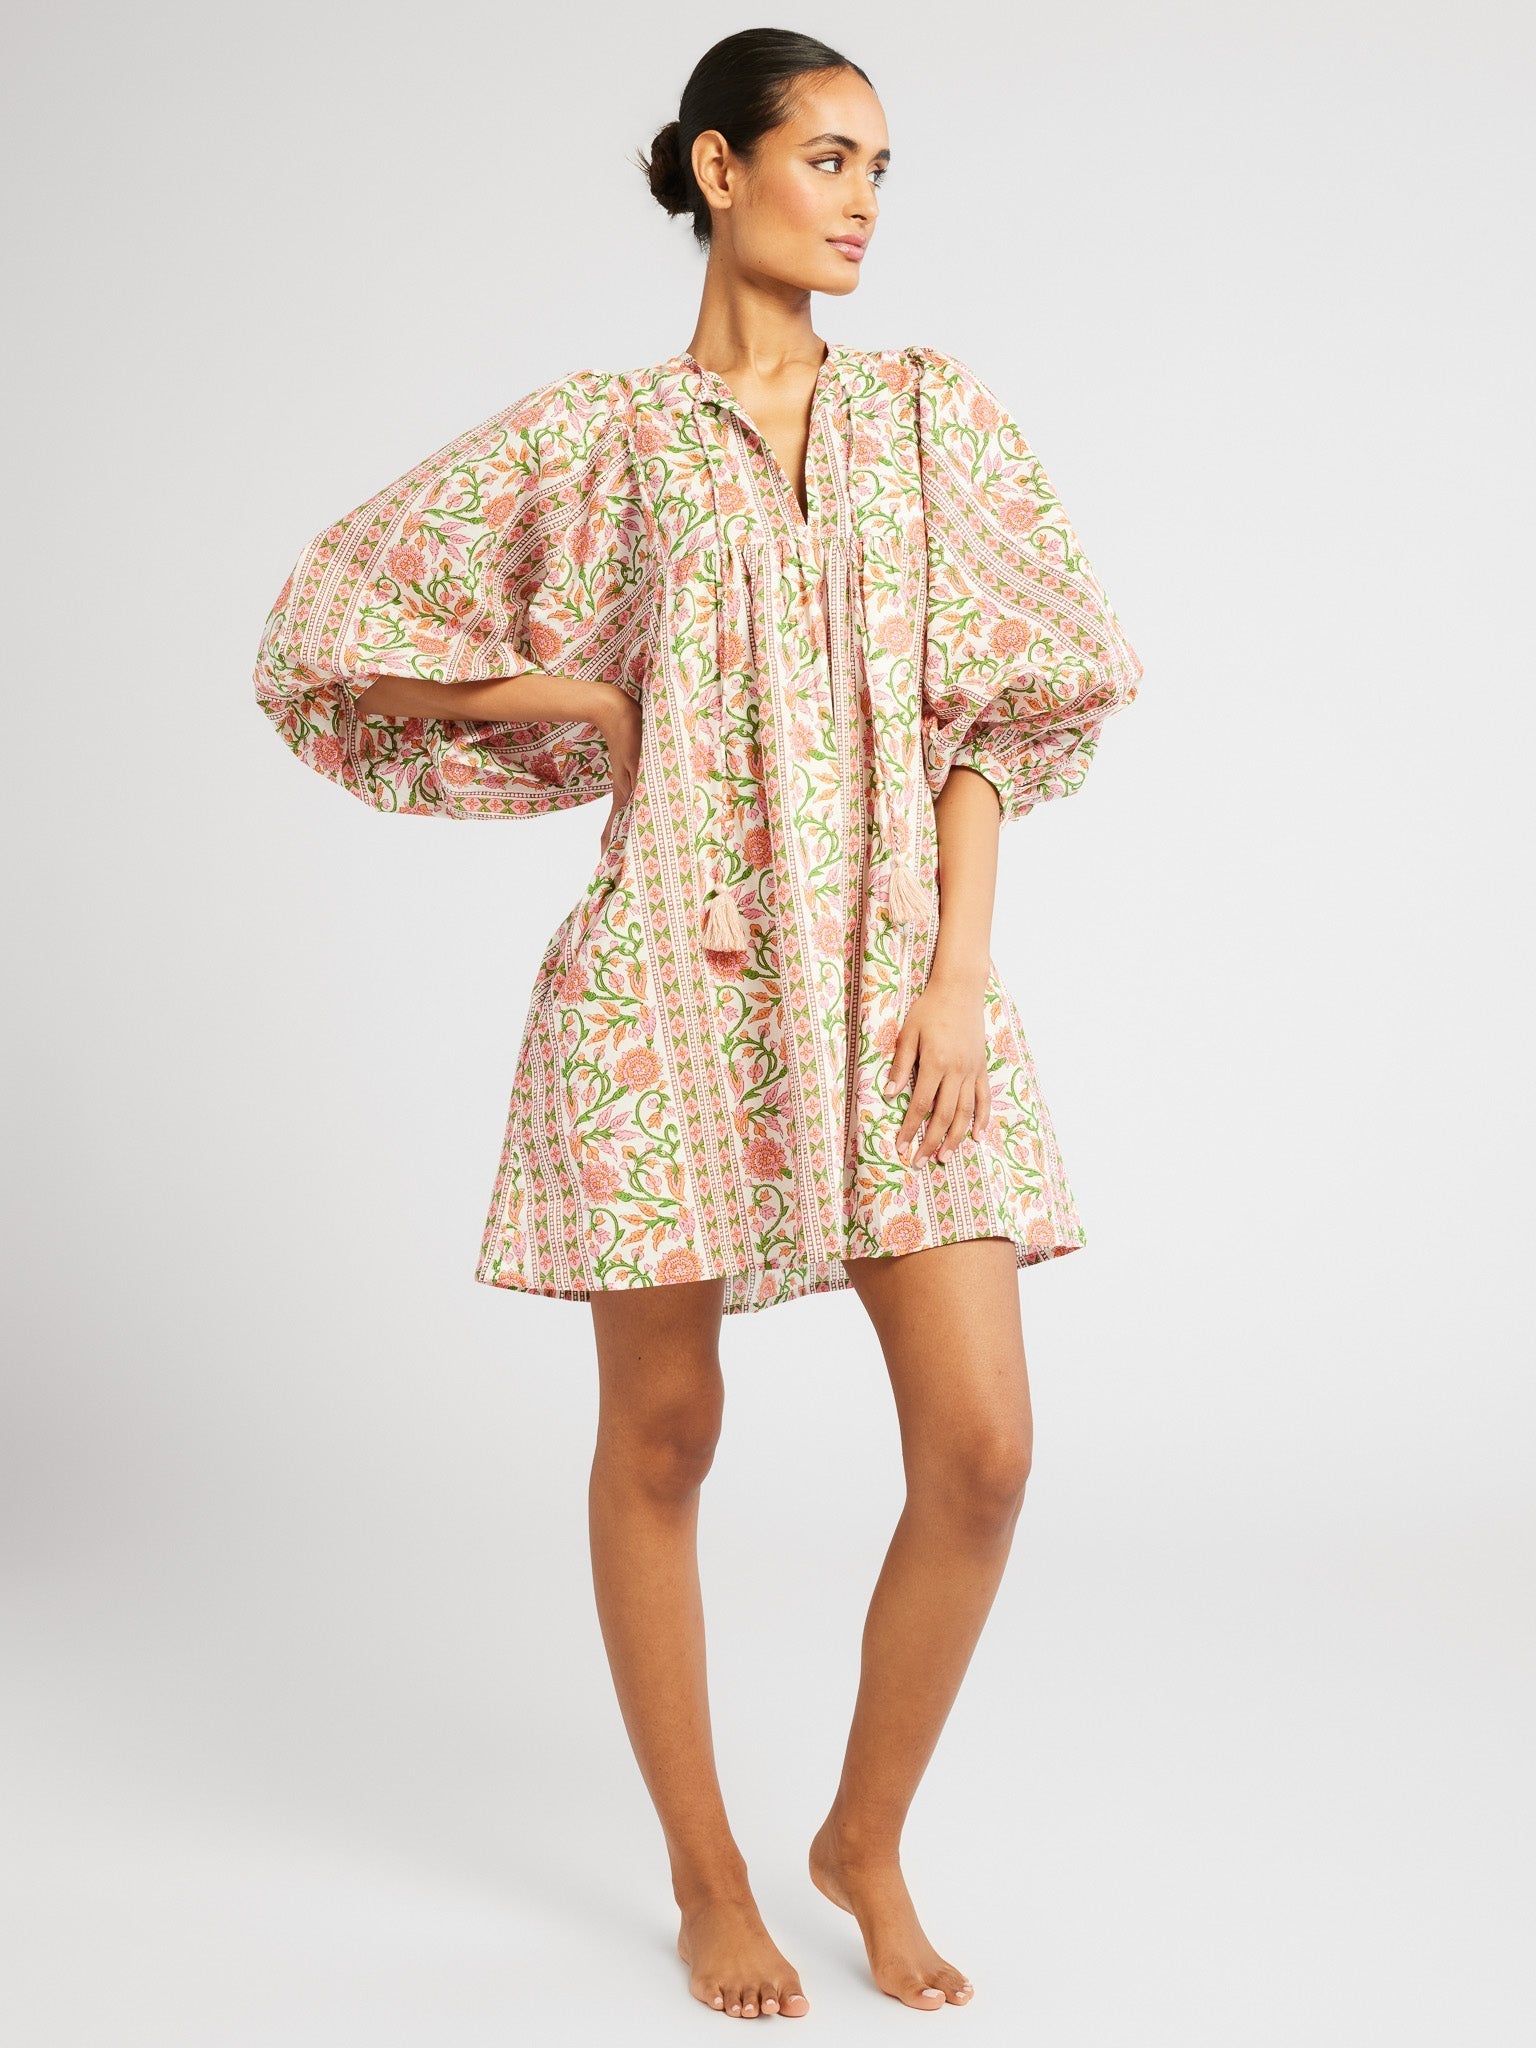 MILLE Clothing Daisy Dress in Avignon Floral